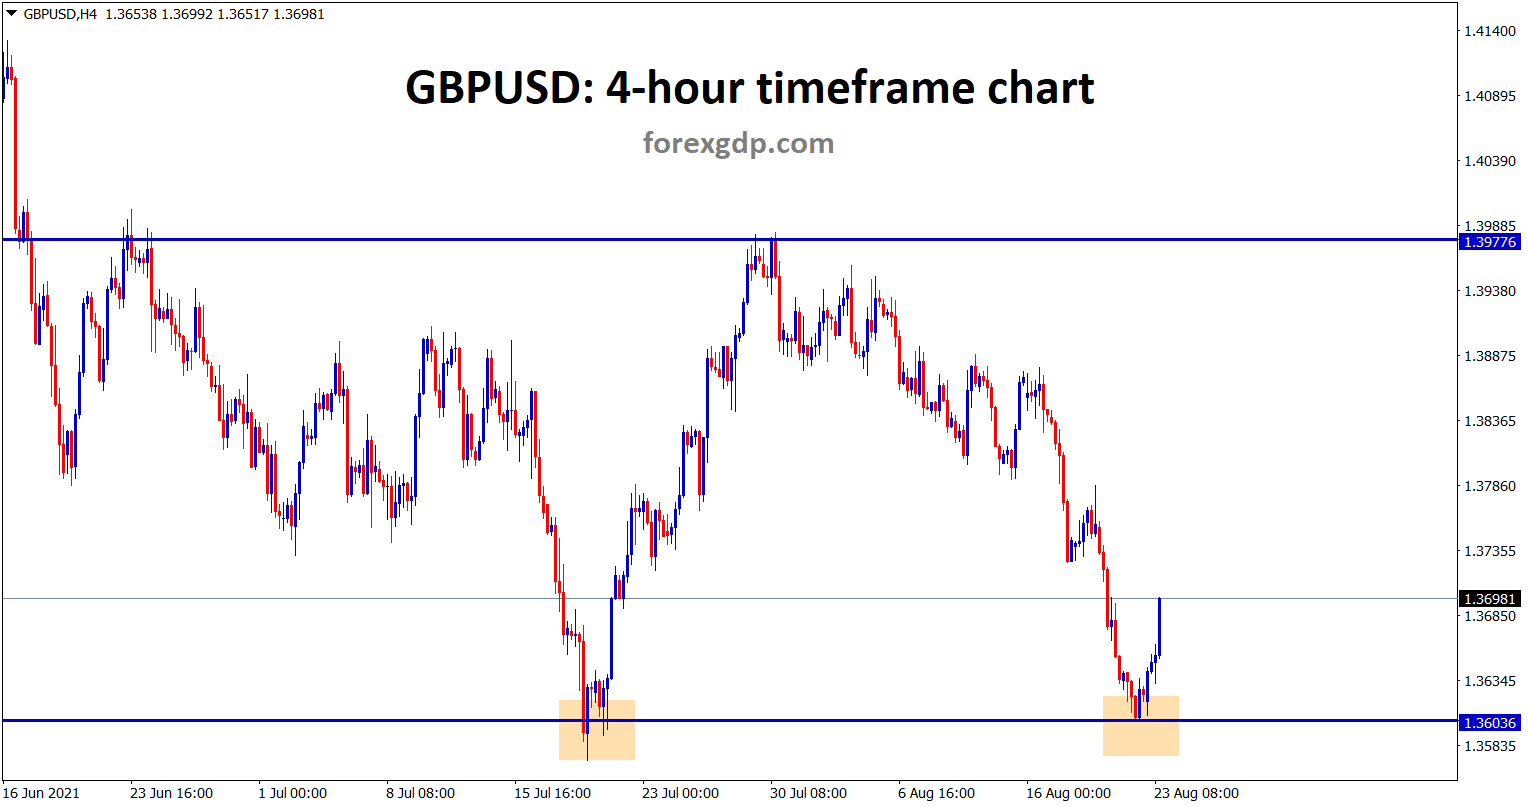 GBPUSD is rebounding from the support area it looks like double bottom